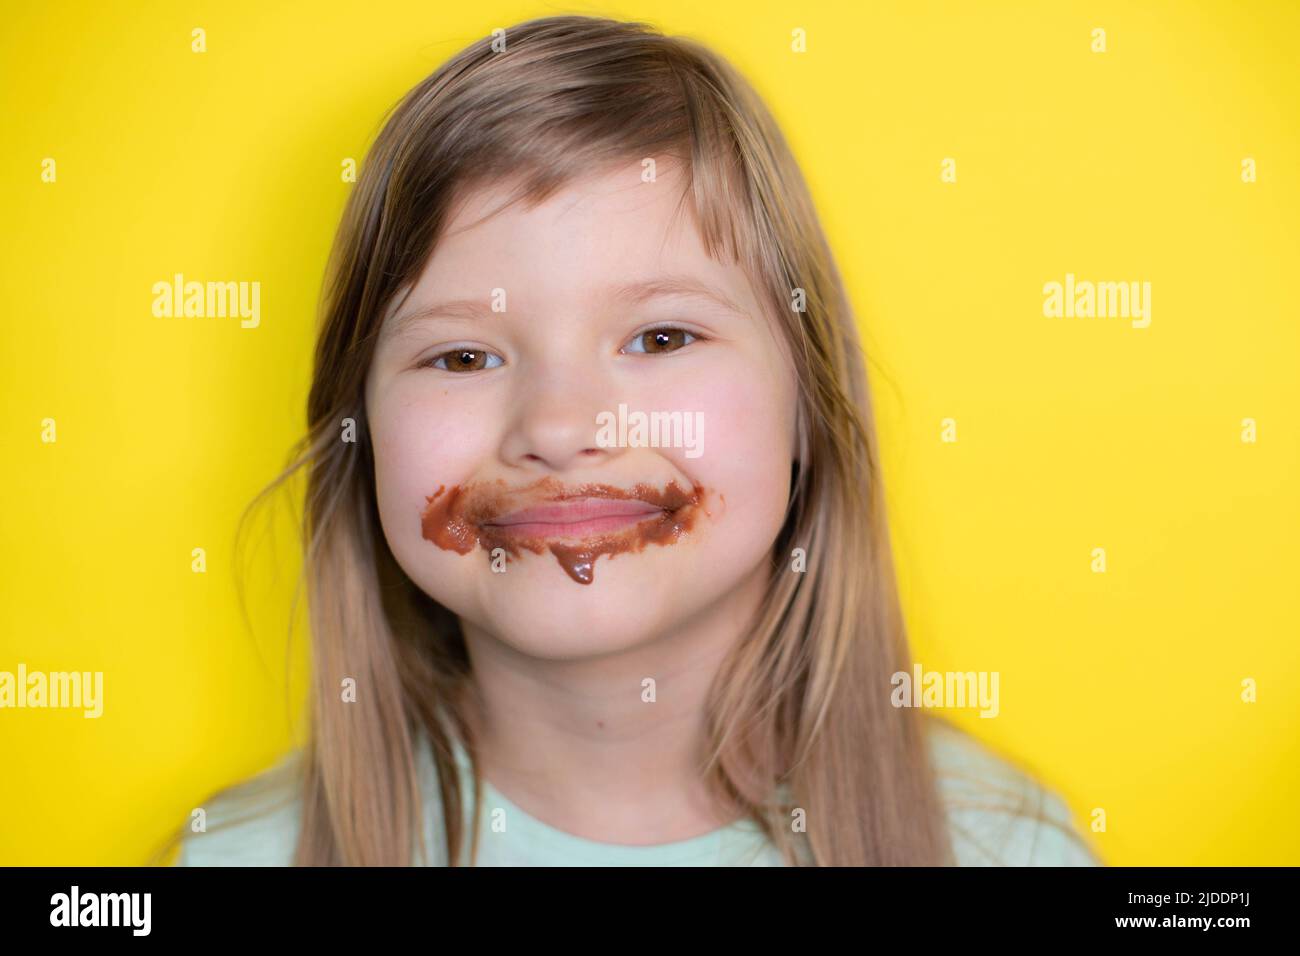 Laughing little girl eating chocolate dirty face Stock Photo